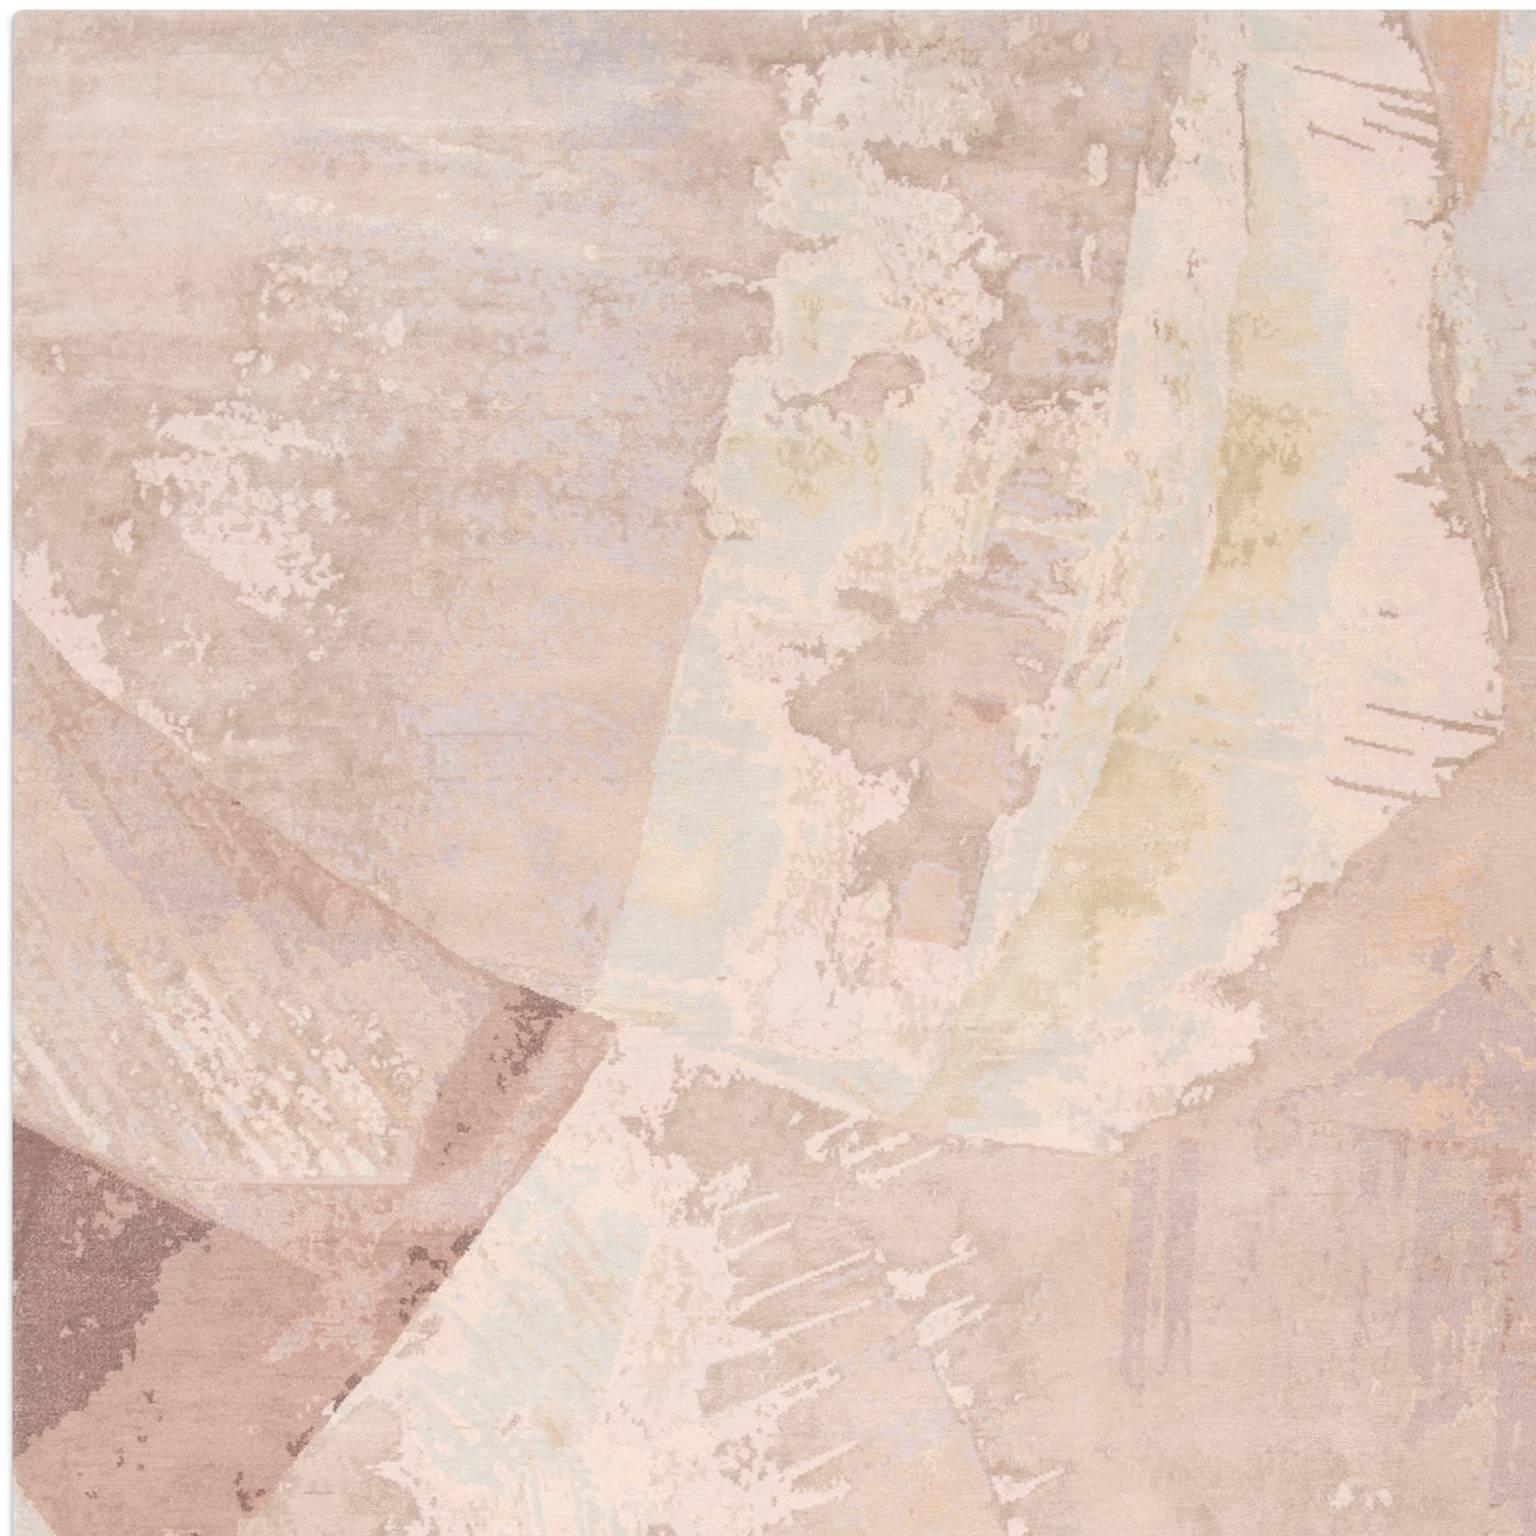 'Calcite' like the minerals rug inspired by natures gem stones, soft and subtle, one of the more delicate sophisticated designs in the Abstract collections. With the use of neutral tones, delicate hues with accents of silk this rug has a soft